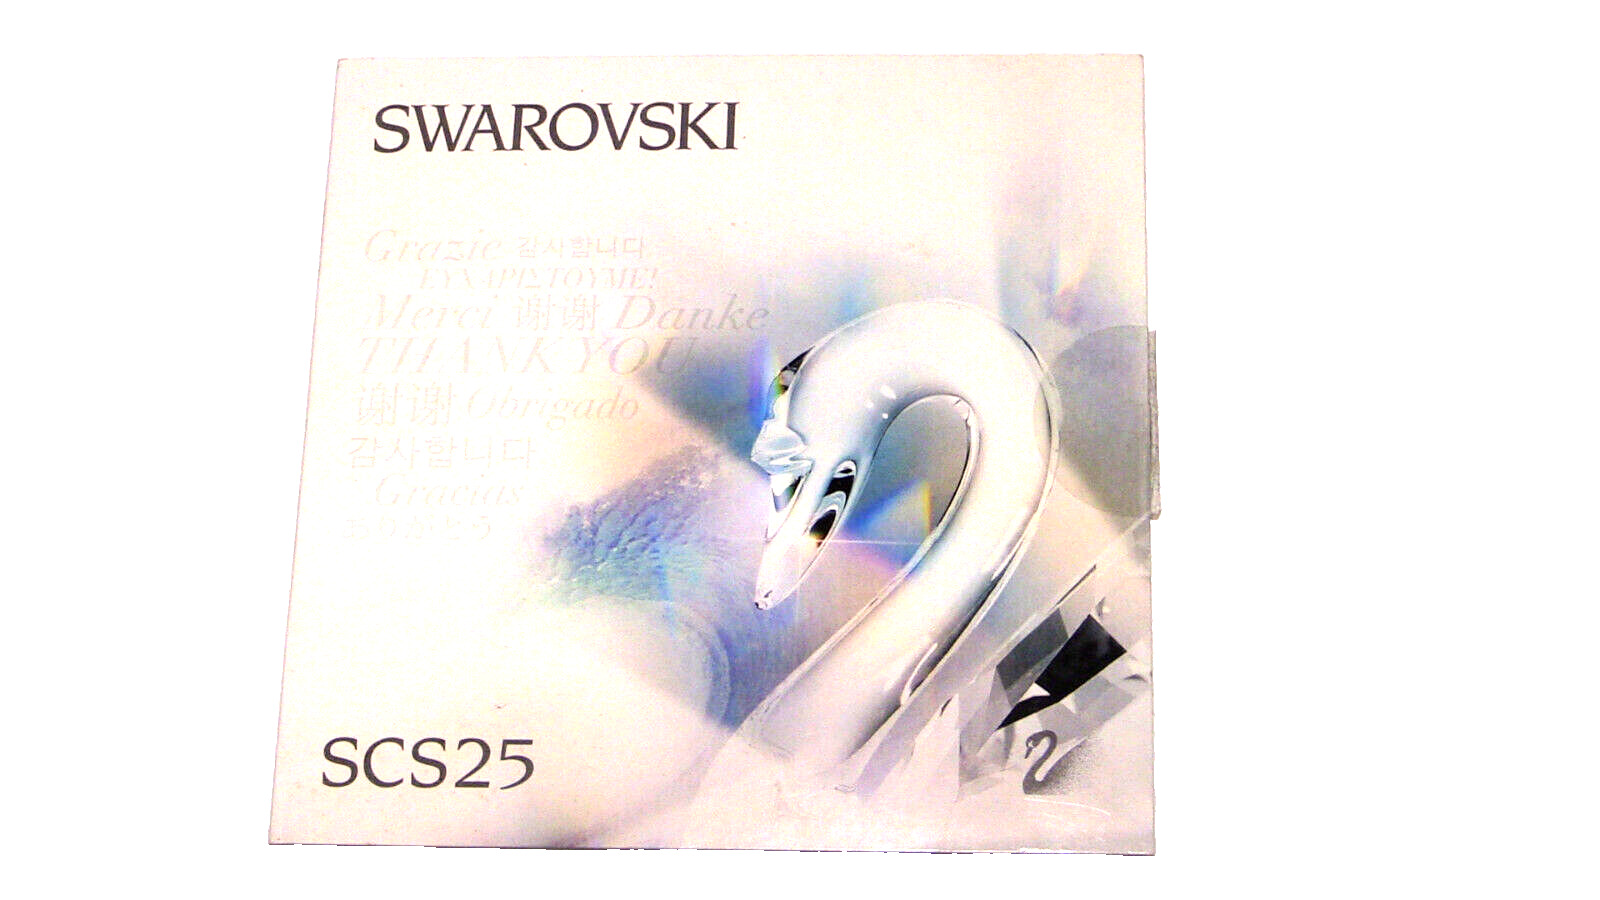 Swarovski Crystal Society 25th Anniversary Music CD SCS Classical compilation.